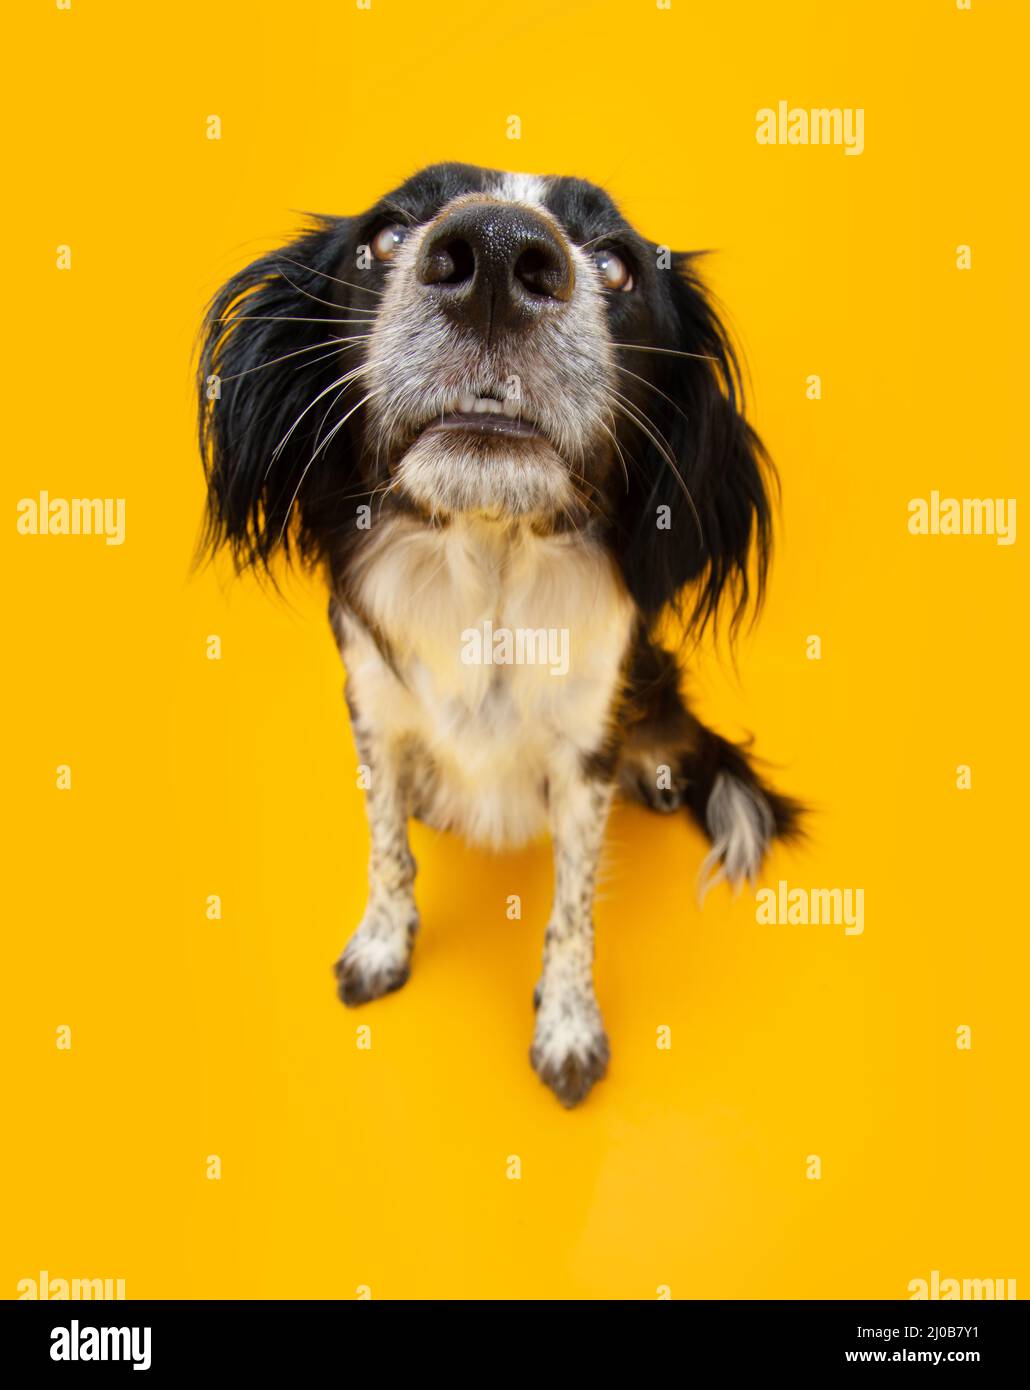 Funny portrait puppy dog staring and sitting. Begging food concept. Isolated on yellow background Stock Photo